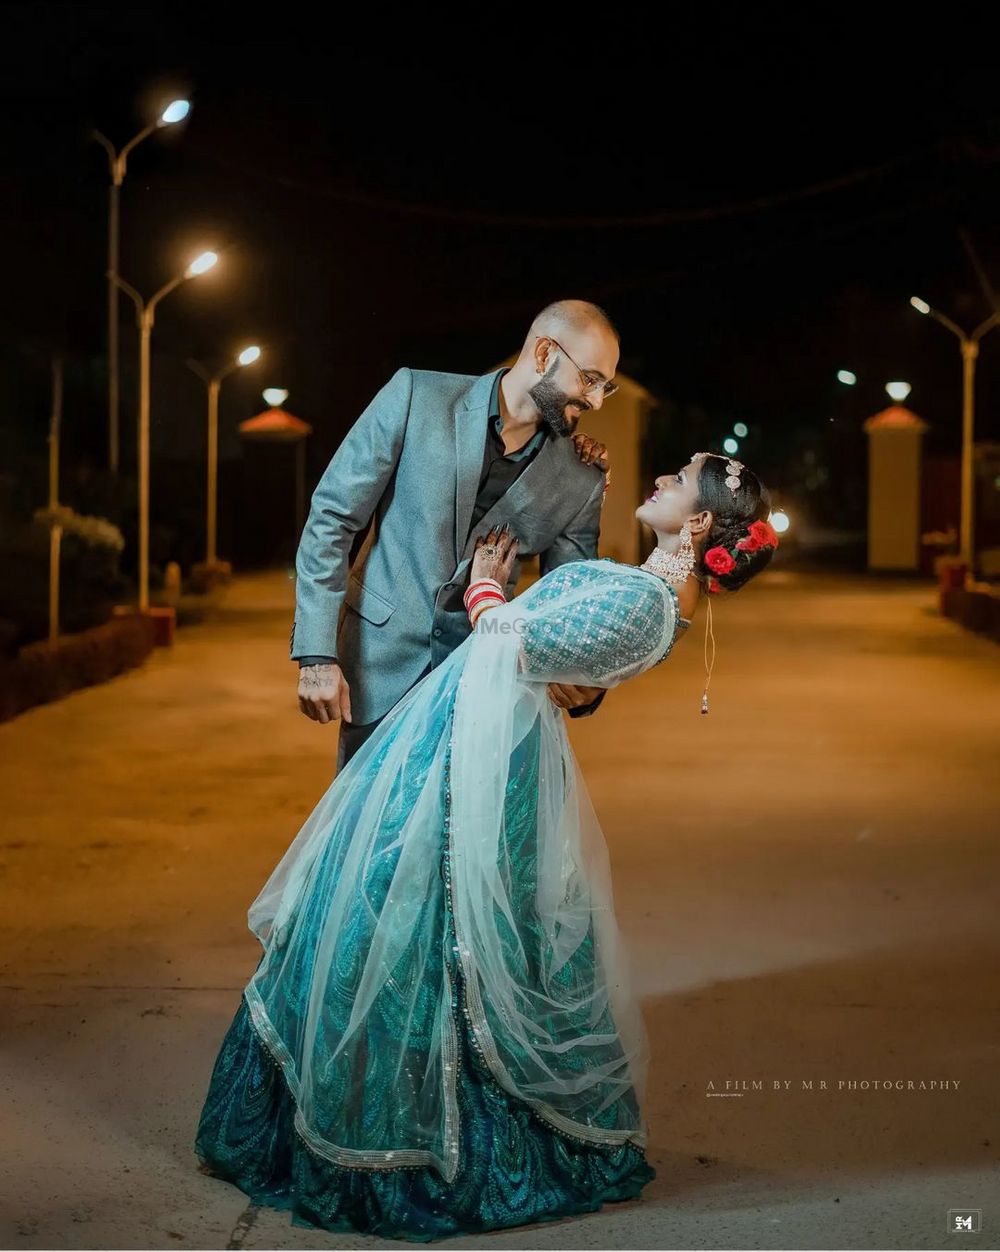 Photo From Z & R - By Weddings By Mohit Raj